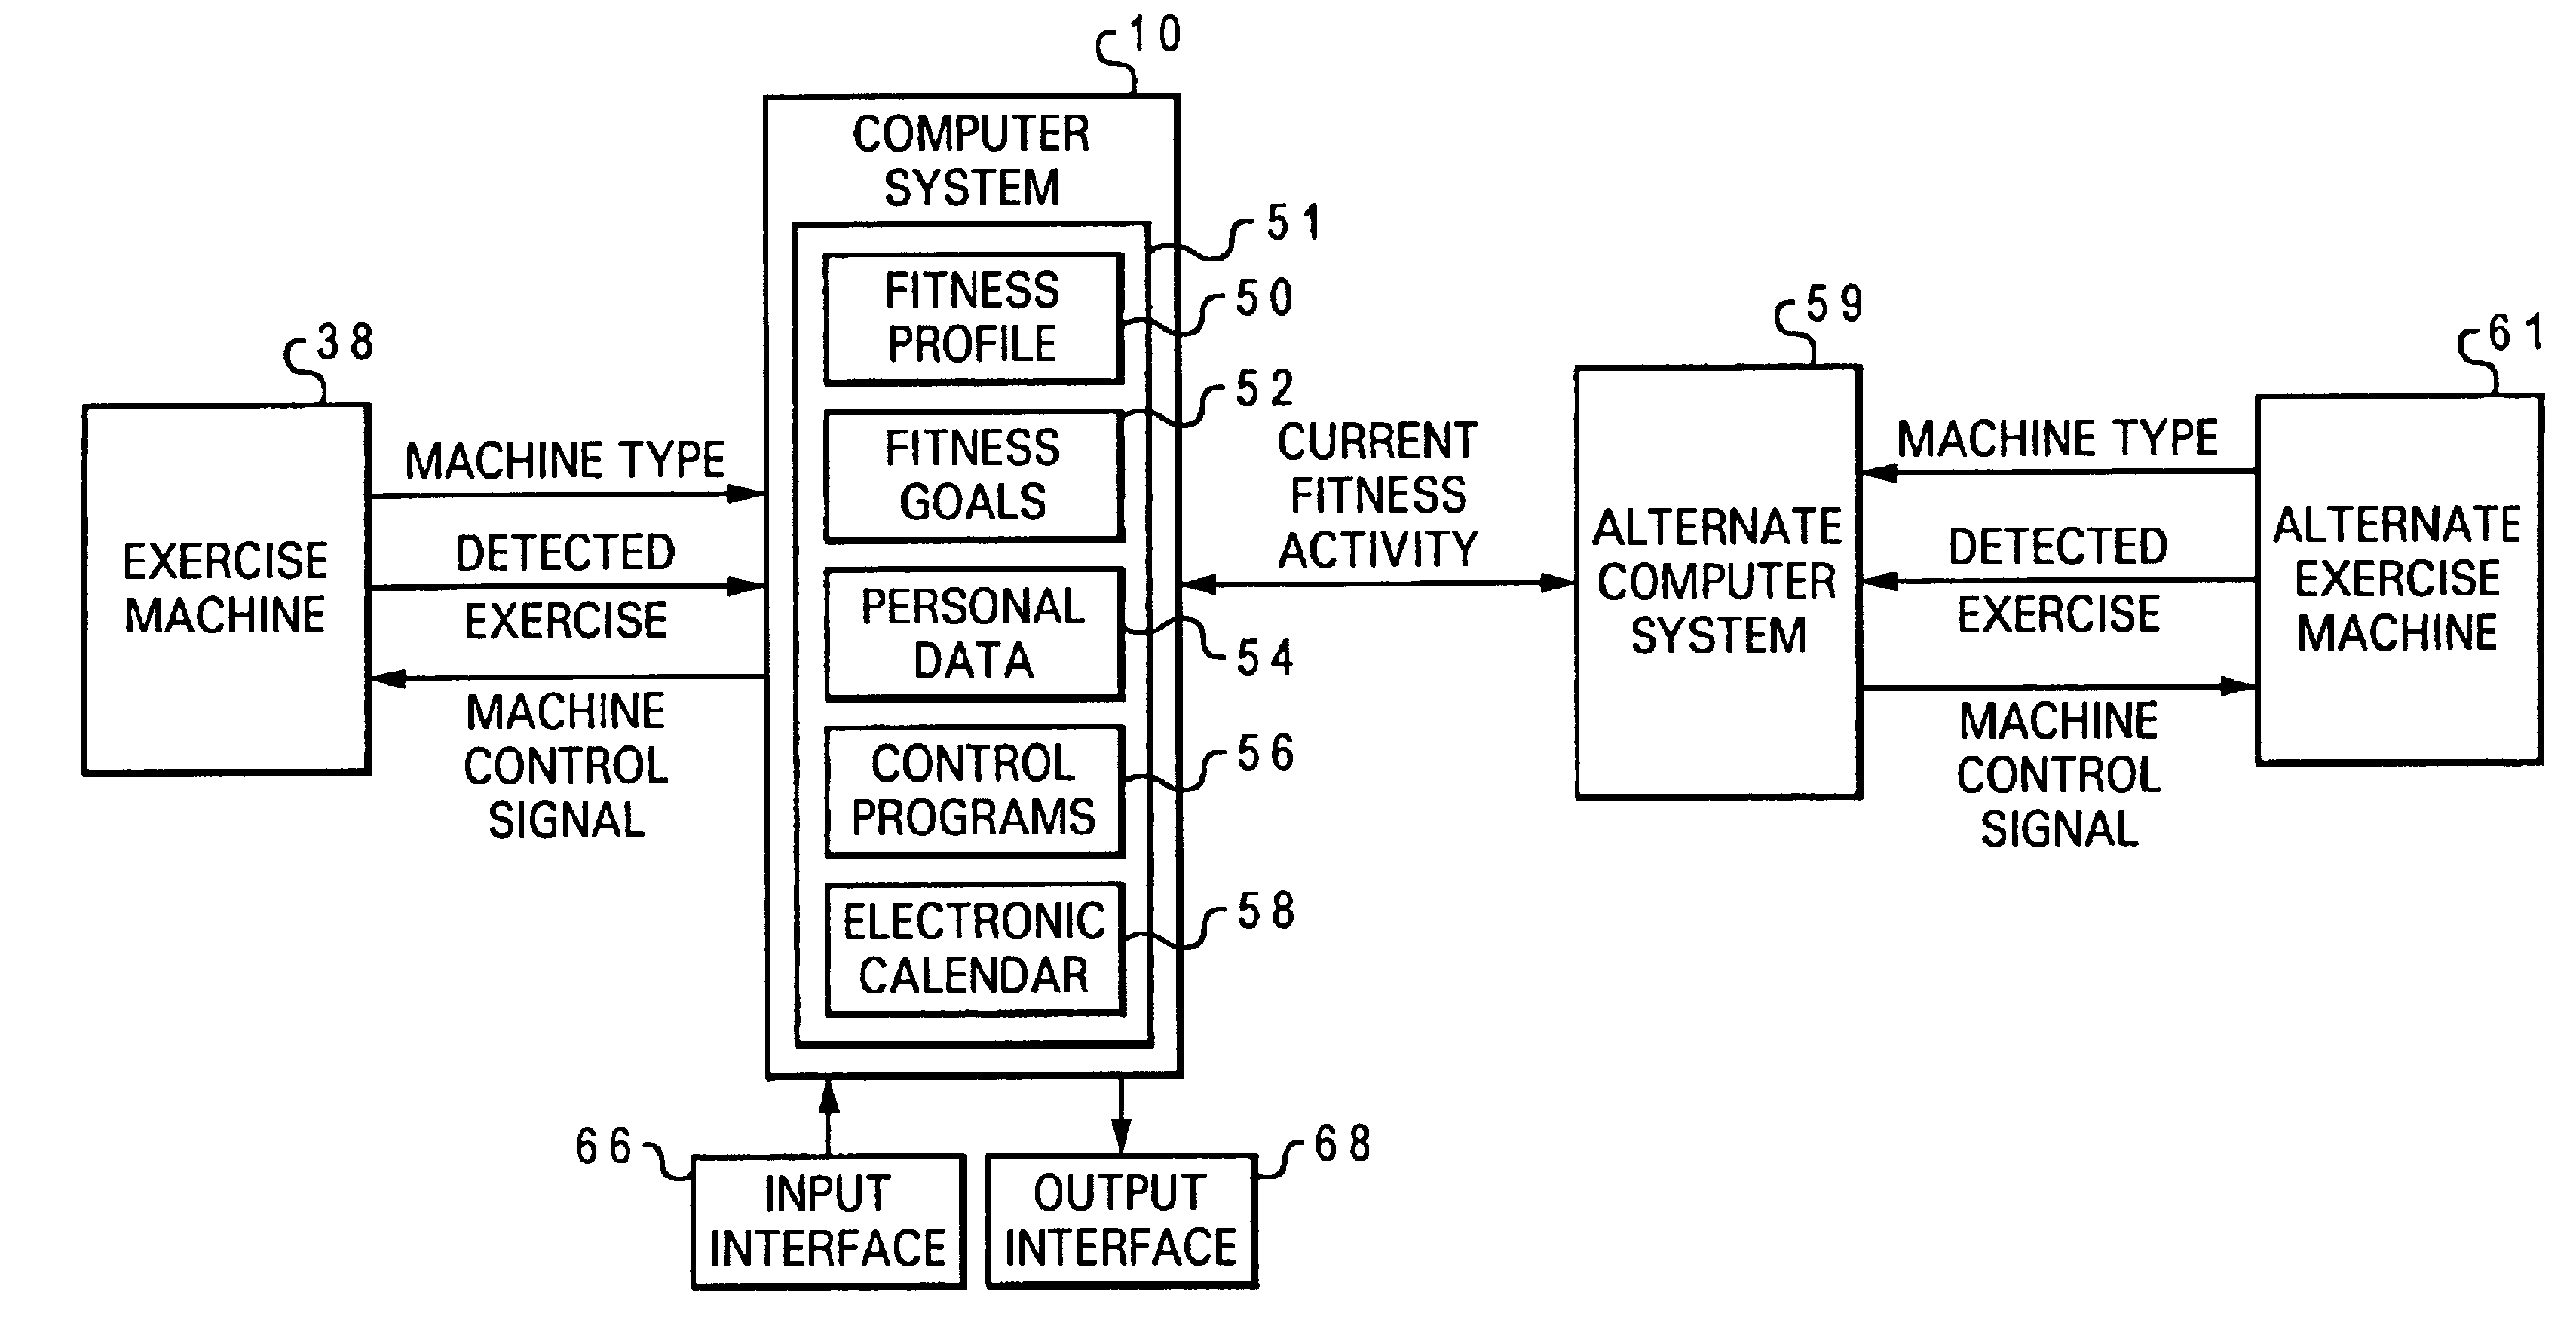 Managing fitness activity across diverse exercise machines utilizing a portable computer system